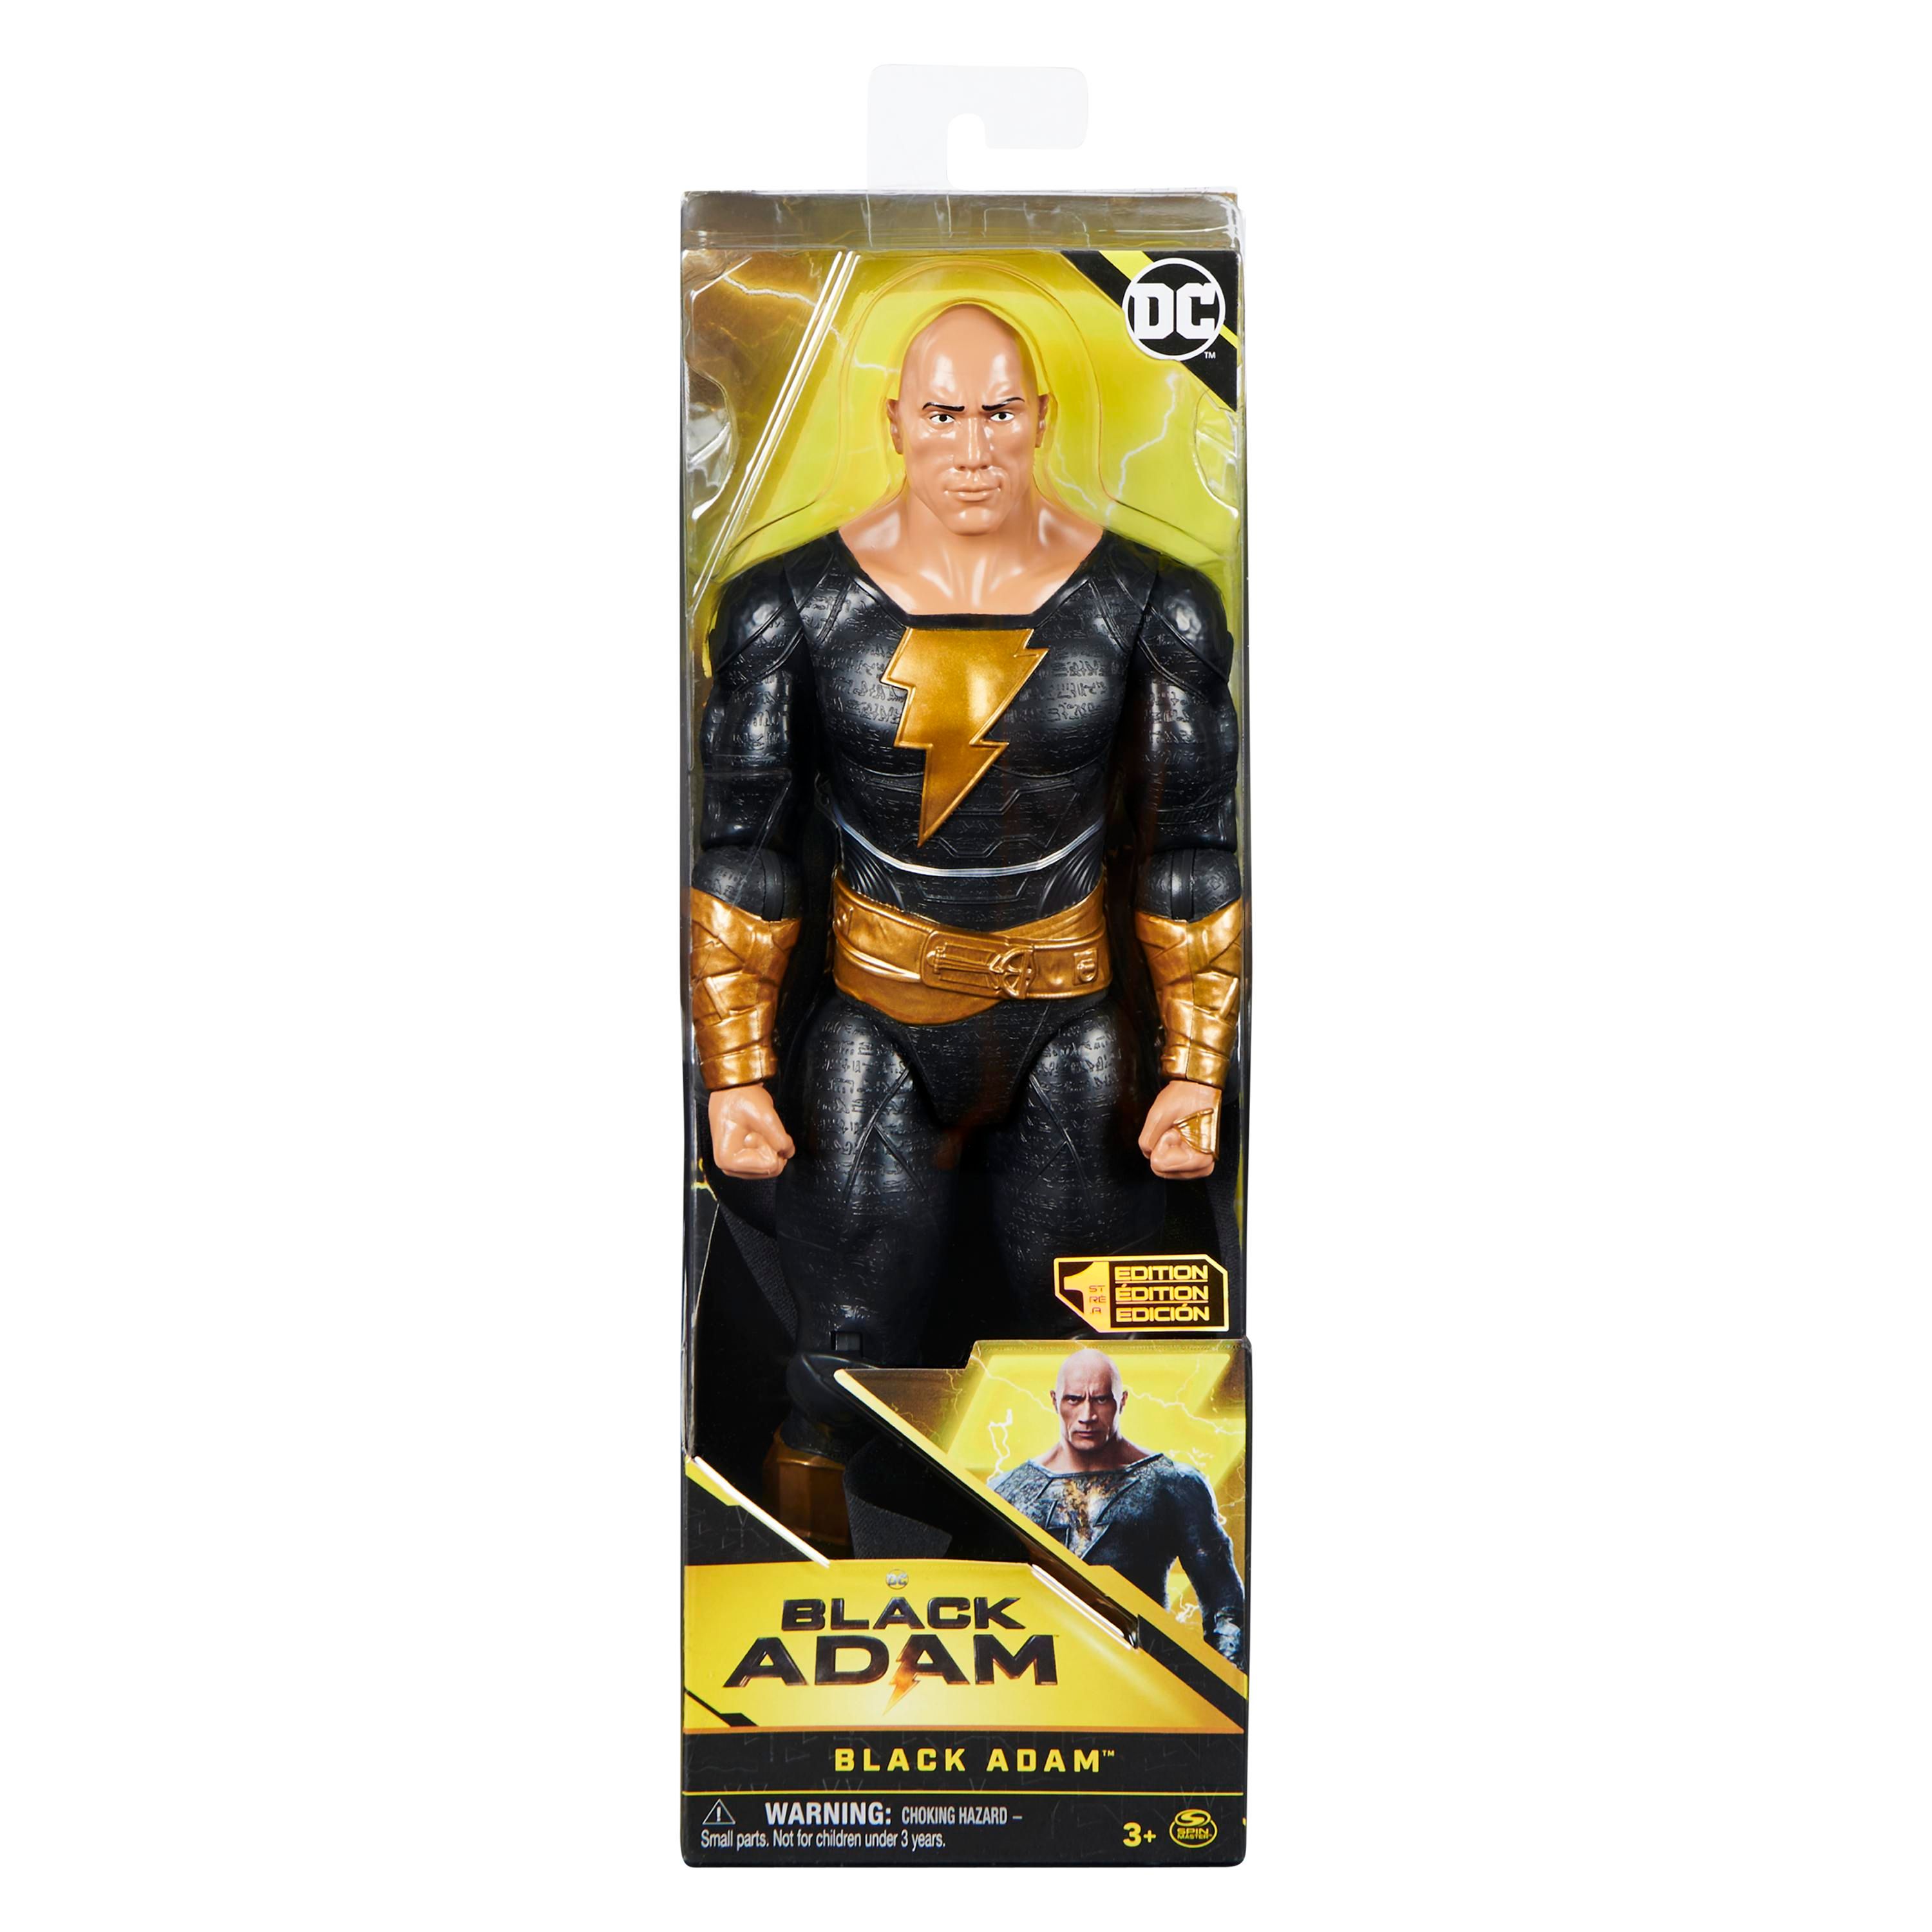 12-inch Black Adam figure by Spin Master